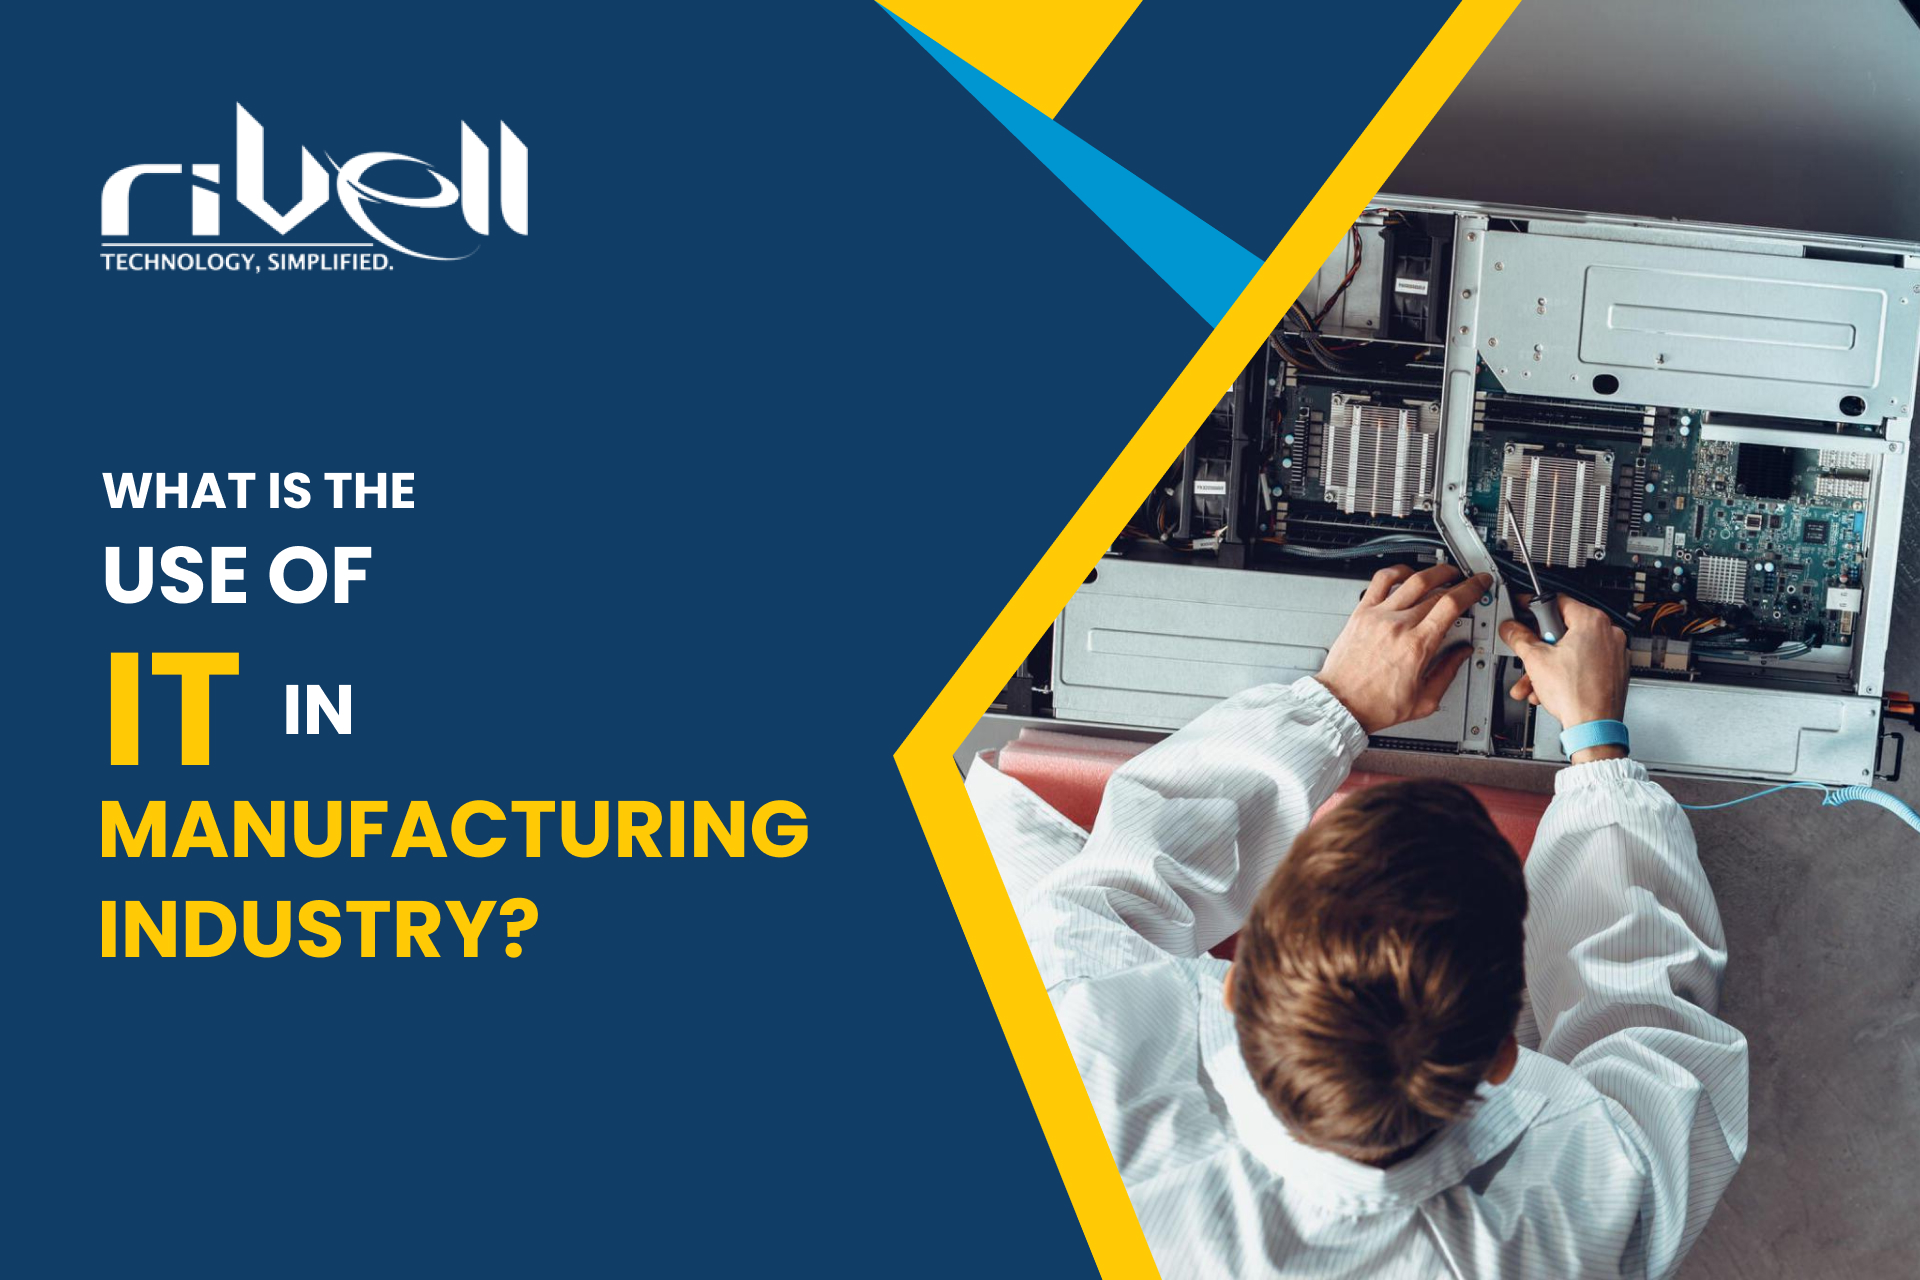 What is the use of IT in Manufacturing industry